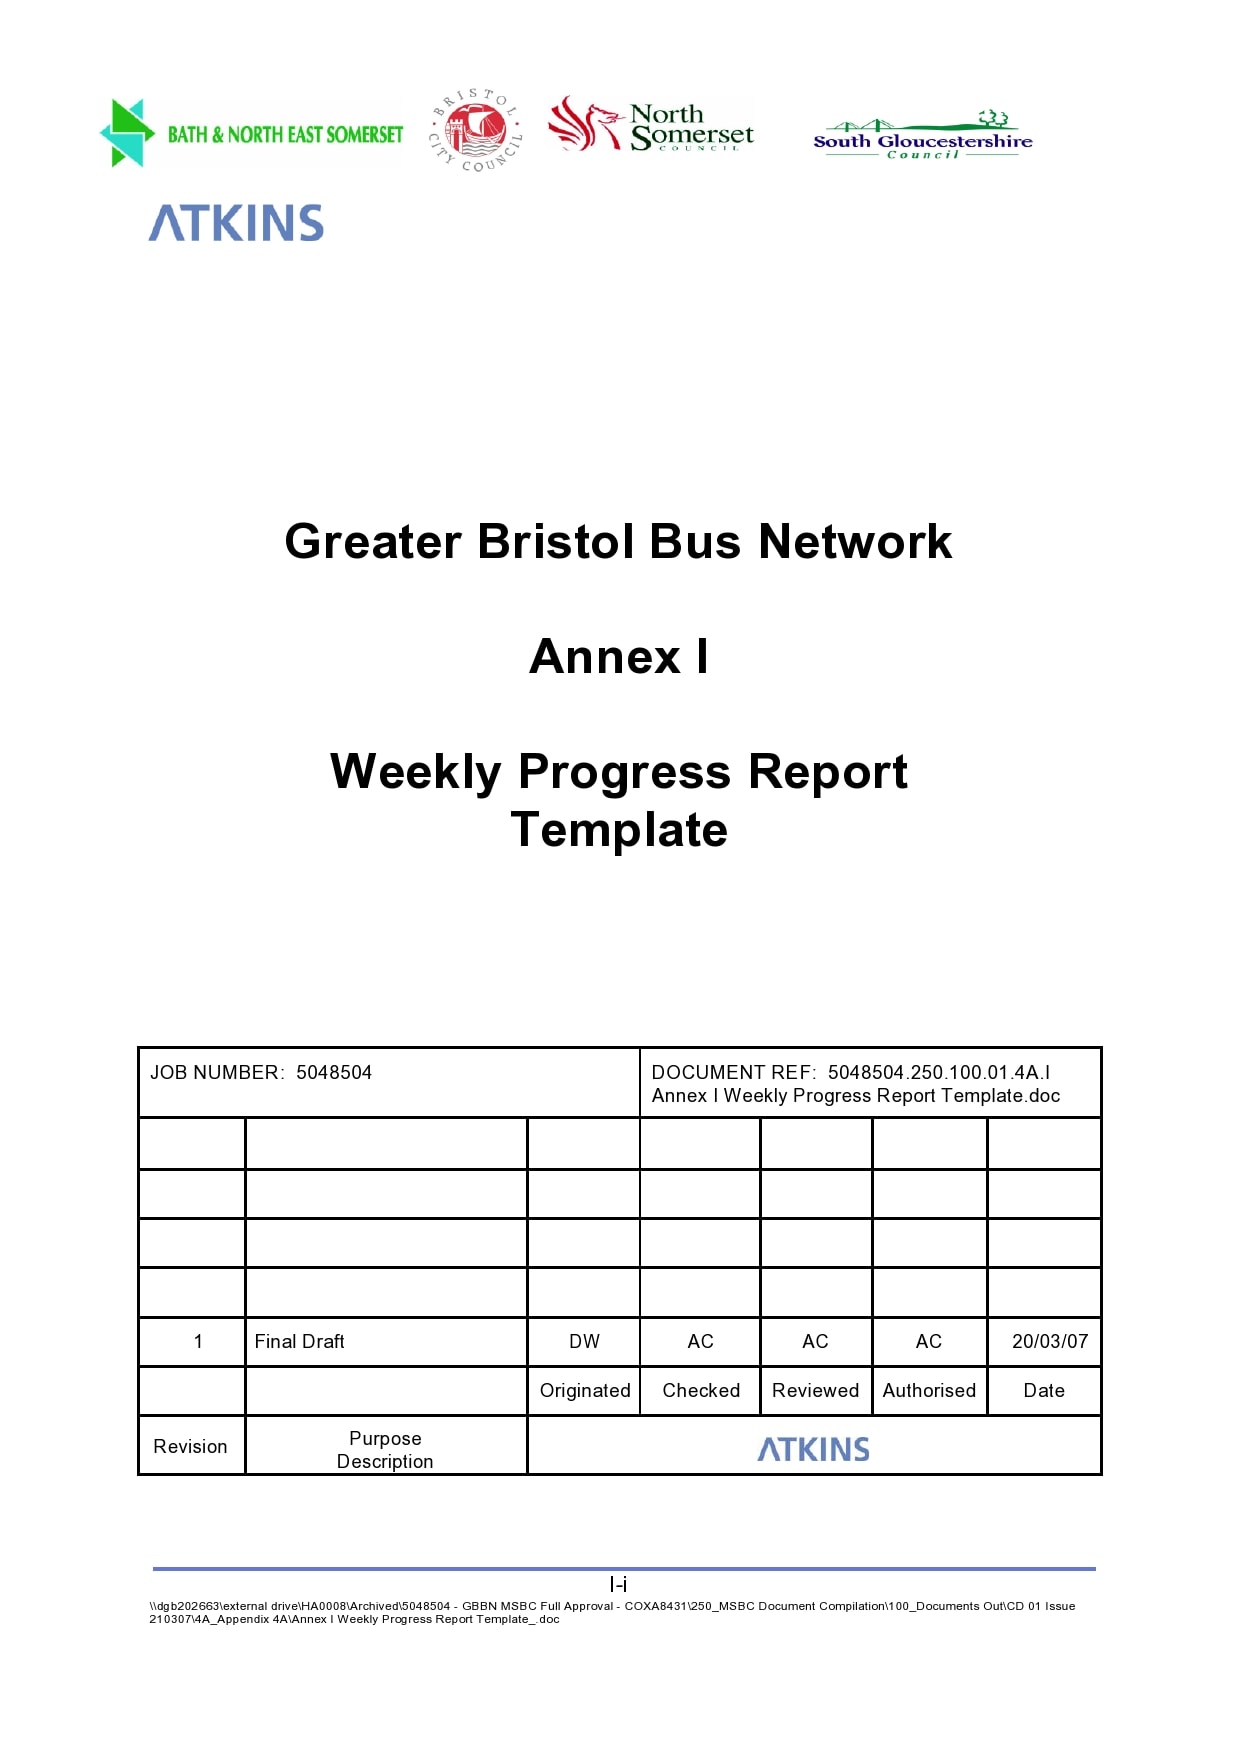 23 Professional Progress Report Templates (Free) - TemplateArchive Pertaining To Student Progress Report Template